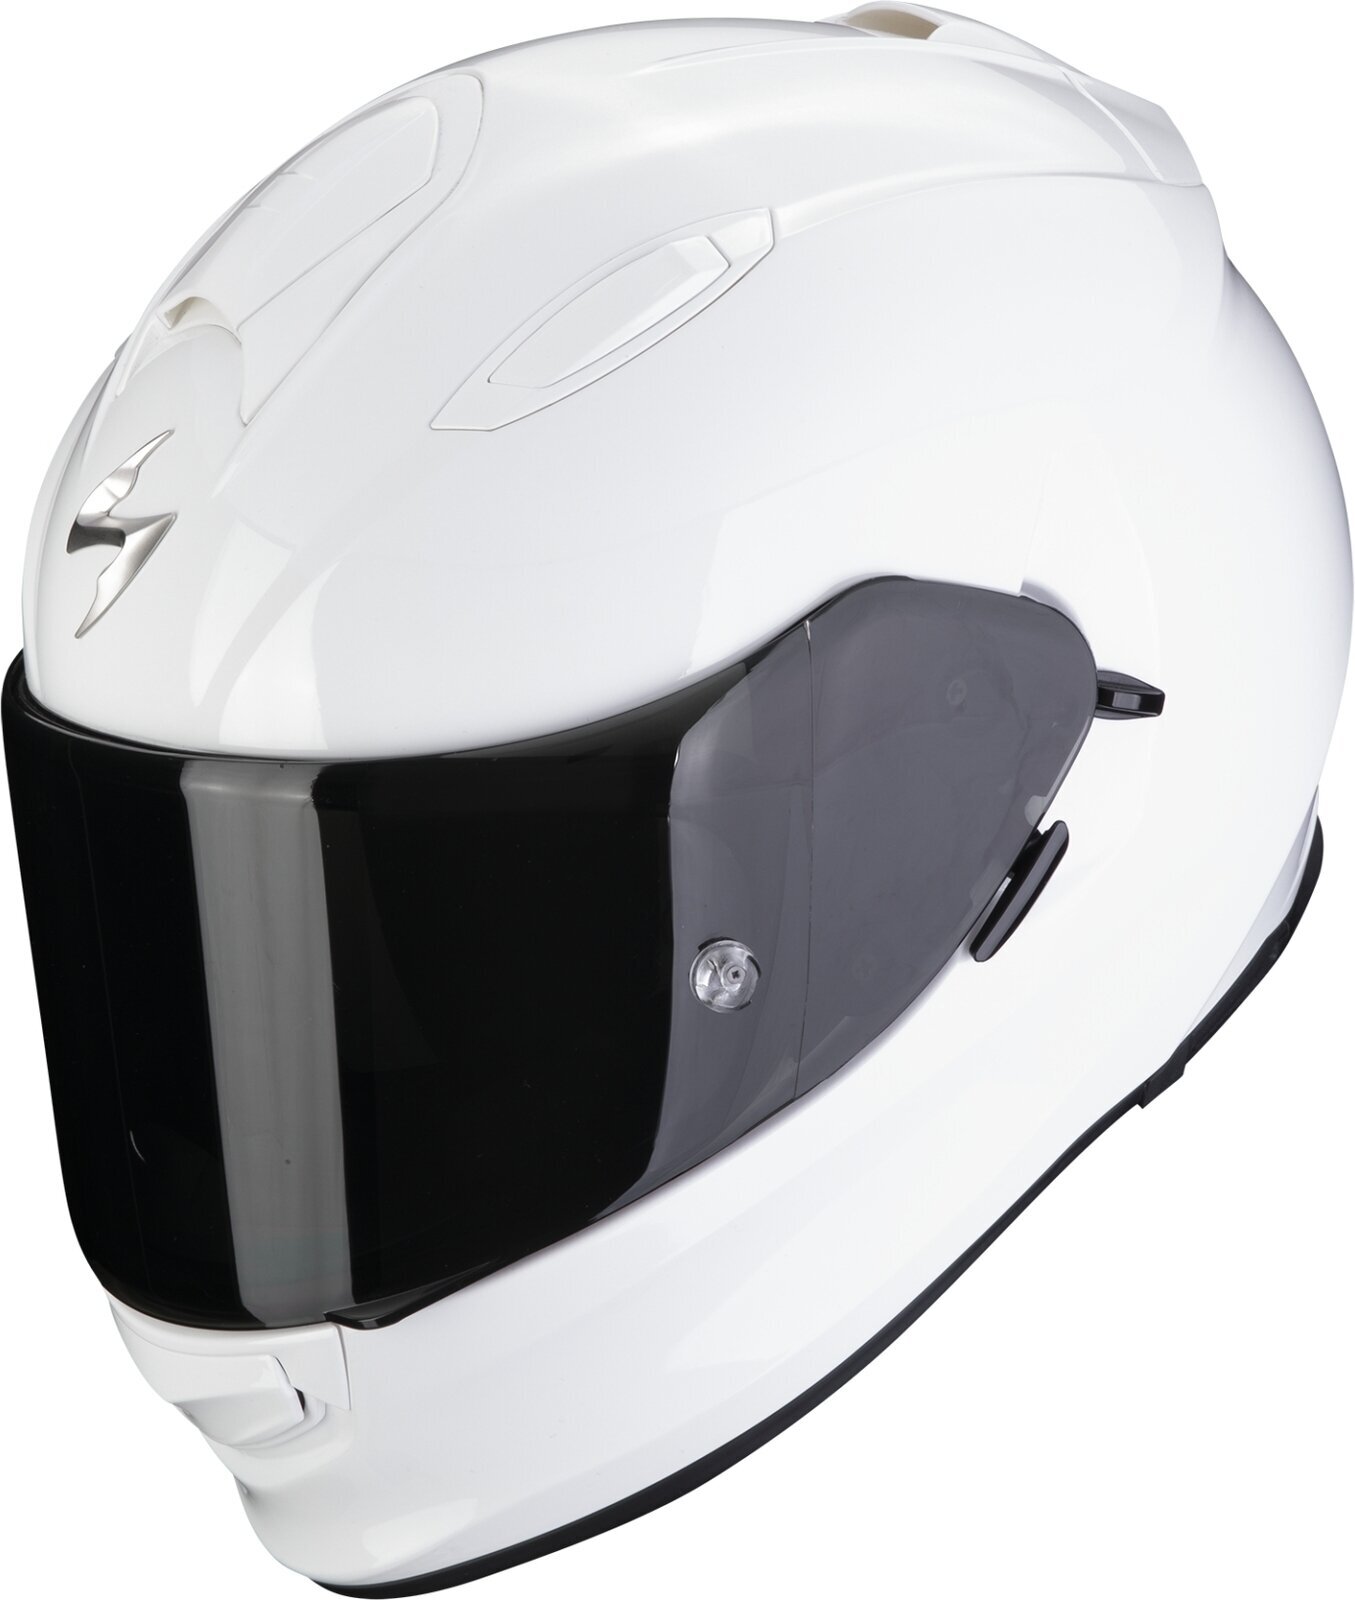 Kask Scorpion EXO 491 SOLID White XS Kask